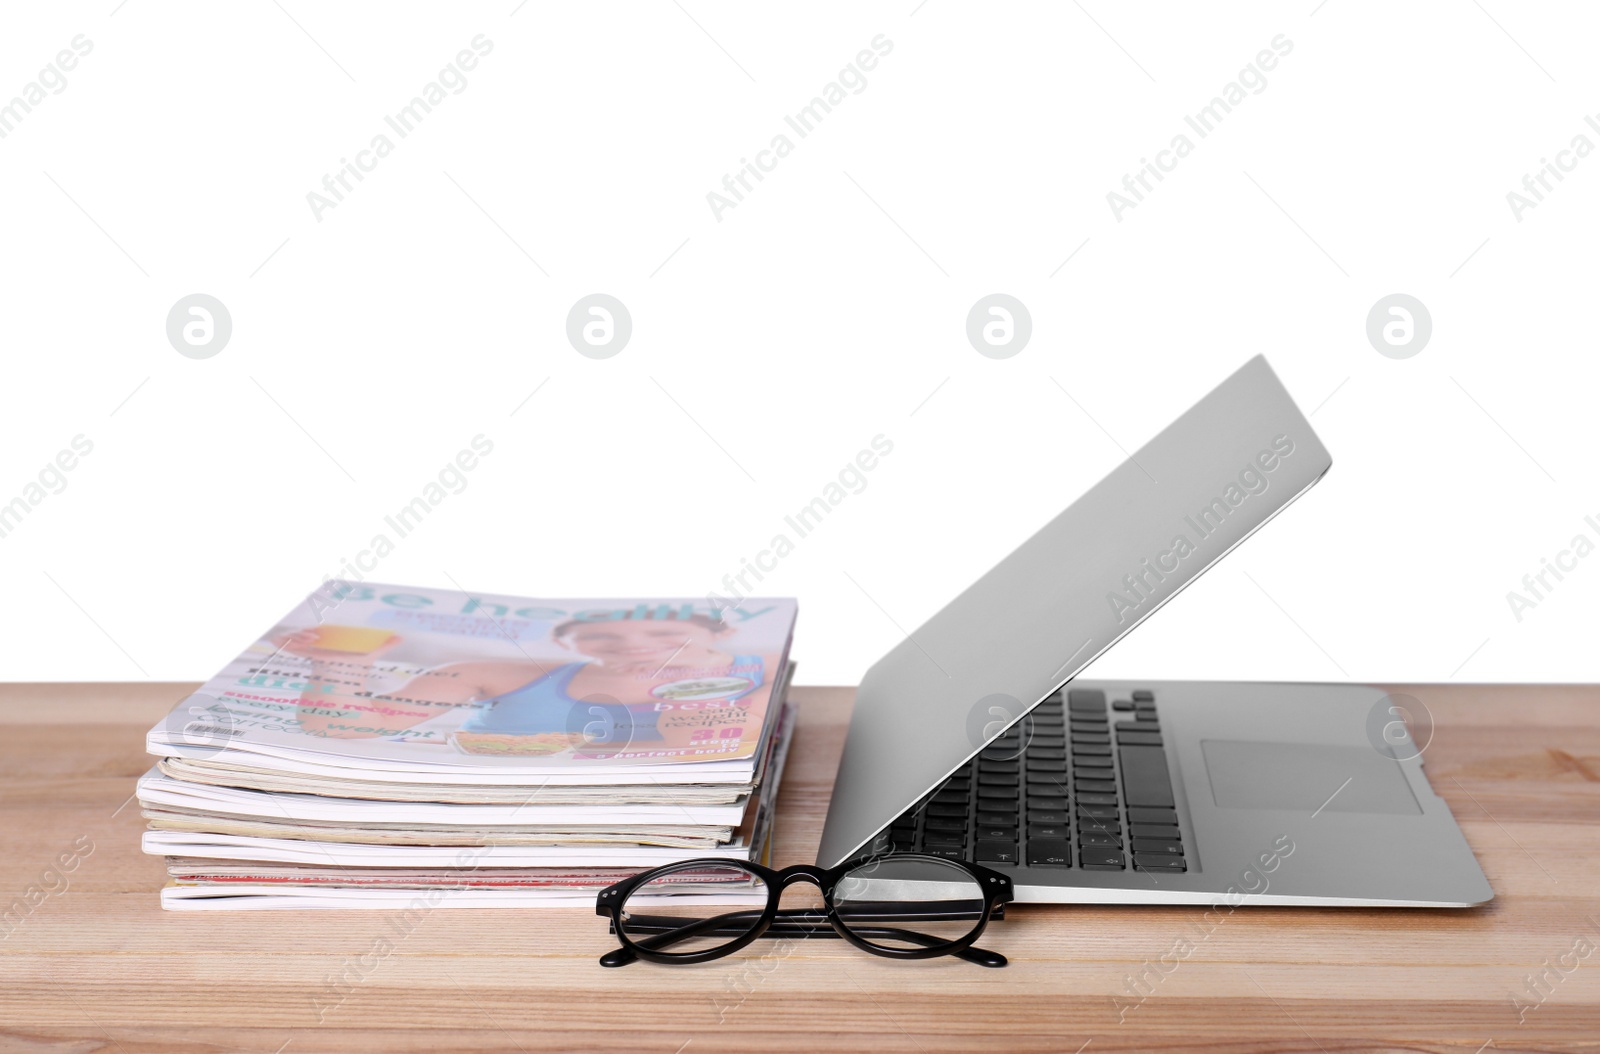 Photo of Laptop, glasses and stack of magazines on wooden table